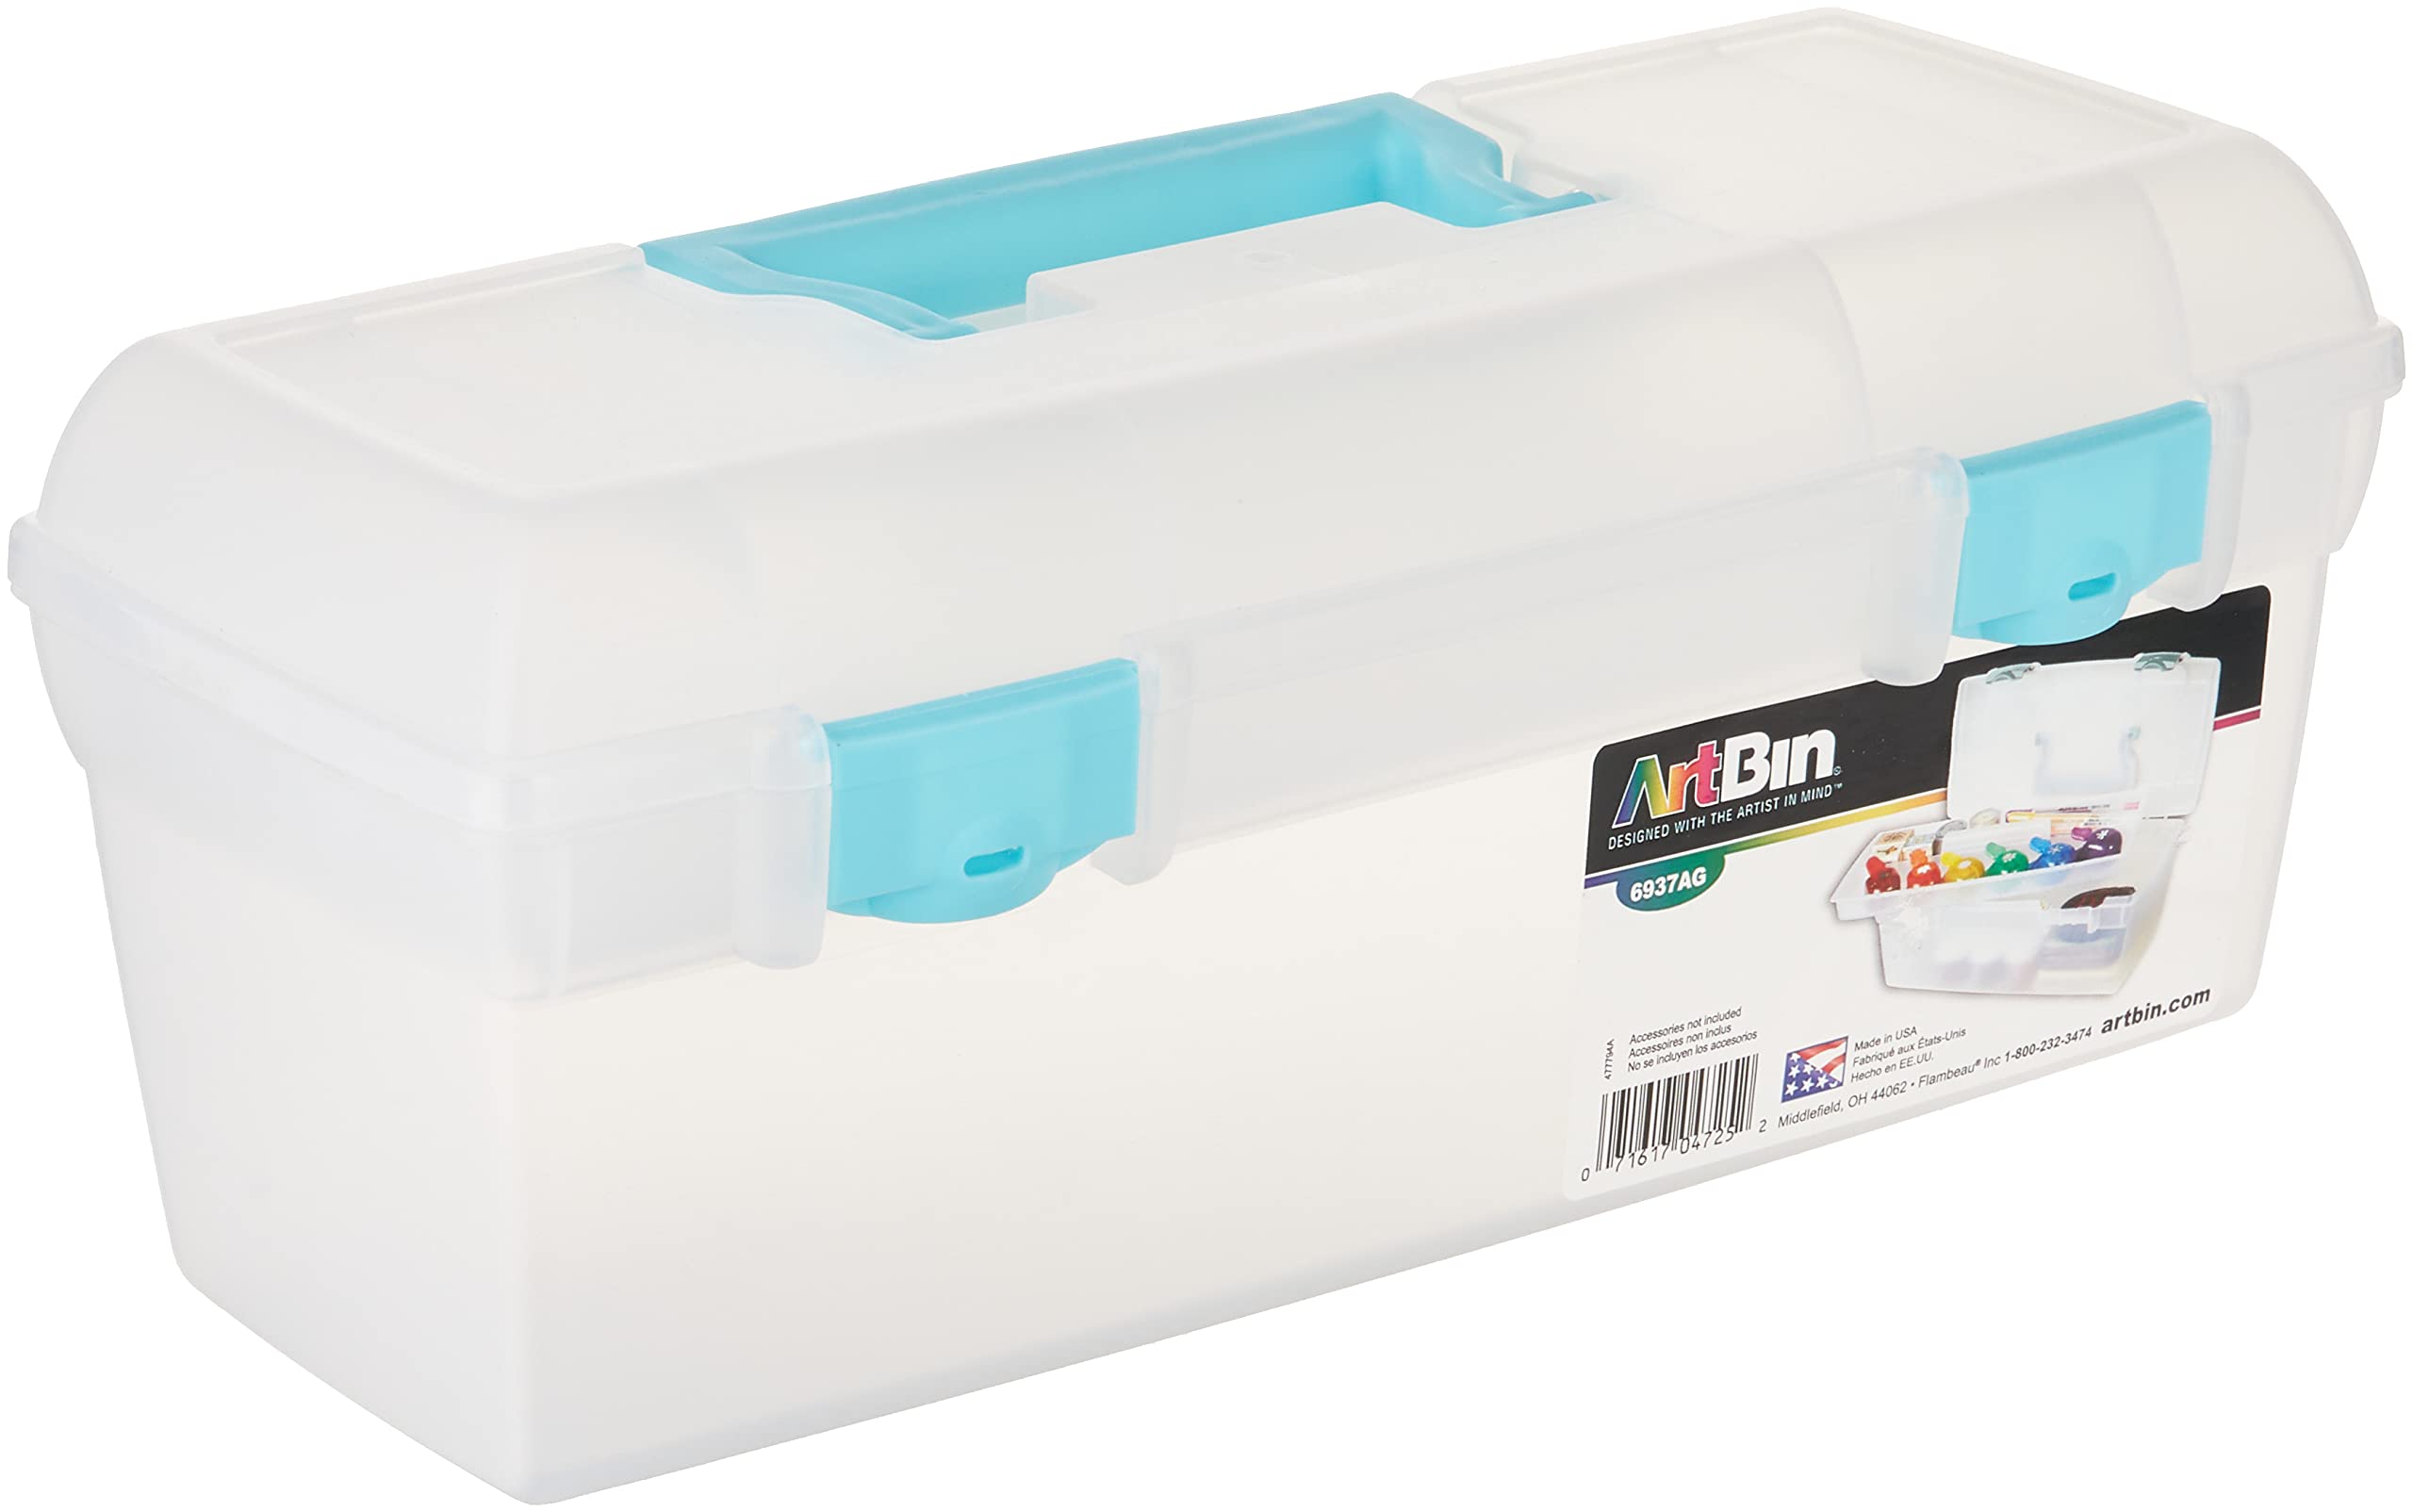 ArtBin 6937AG Essentials Lift-Out Tray Box, Portable Art & Craft Organizer with Handle and Tray, Clear/Aqua